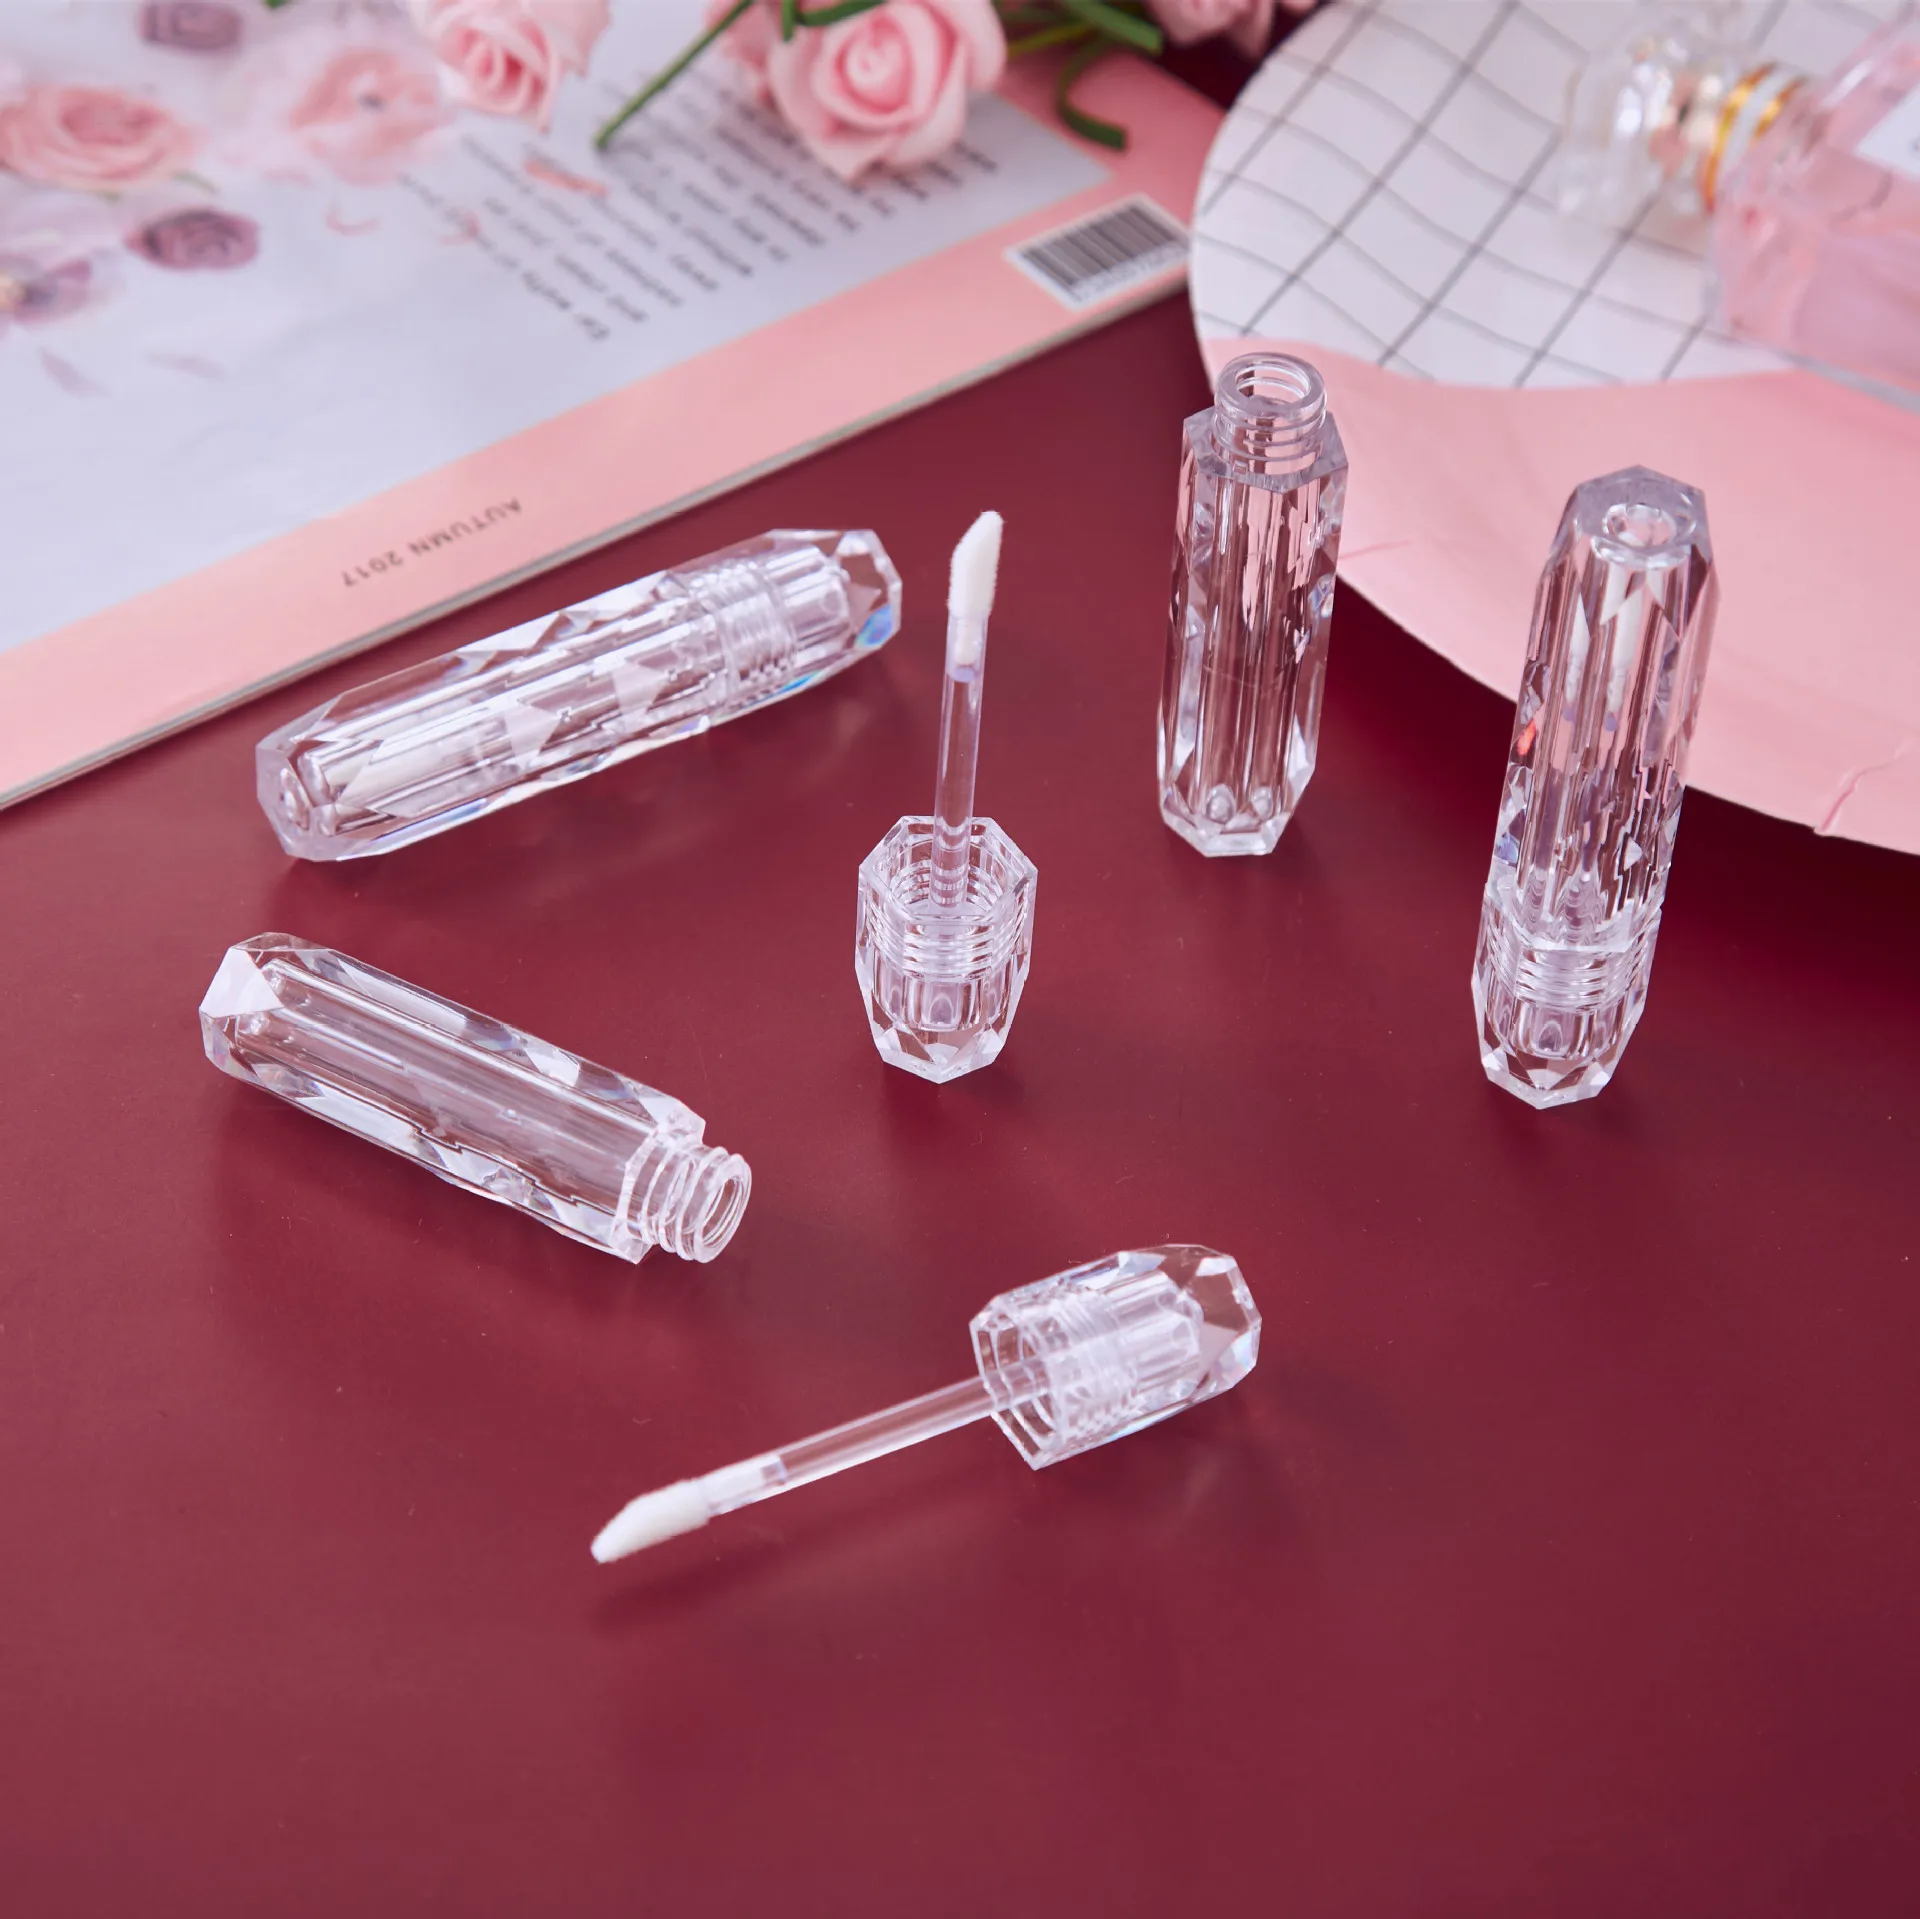 2.5ml Diamond Clear Plastic Lip Gloss Empty Tube Cosmetic LipGloss Container Packaging clear business card holder acrylic plastic display stand rack desktop office dropship